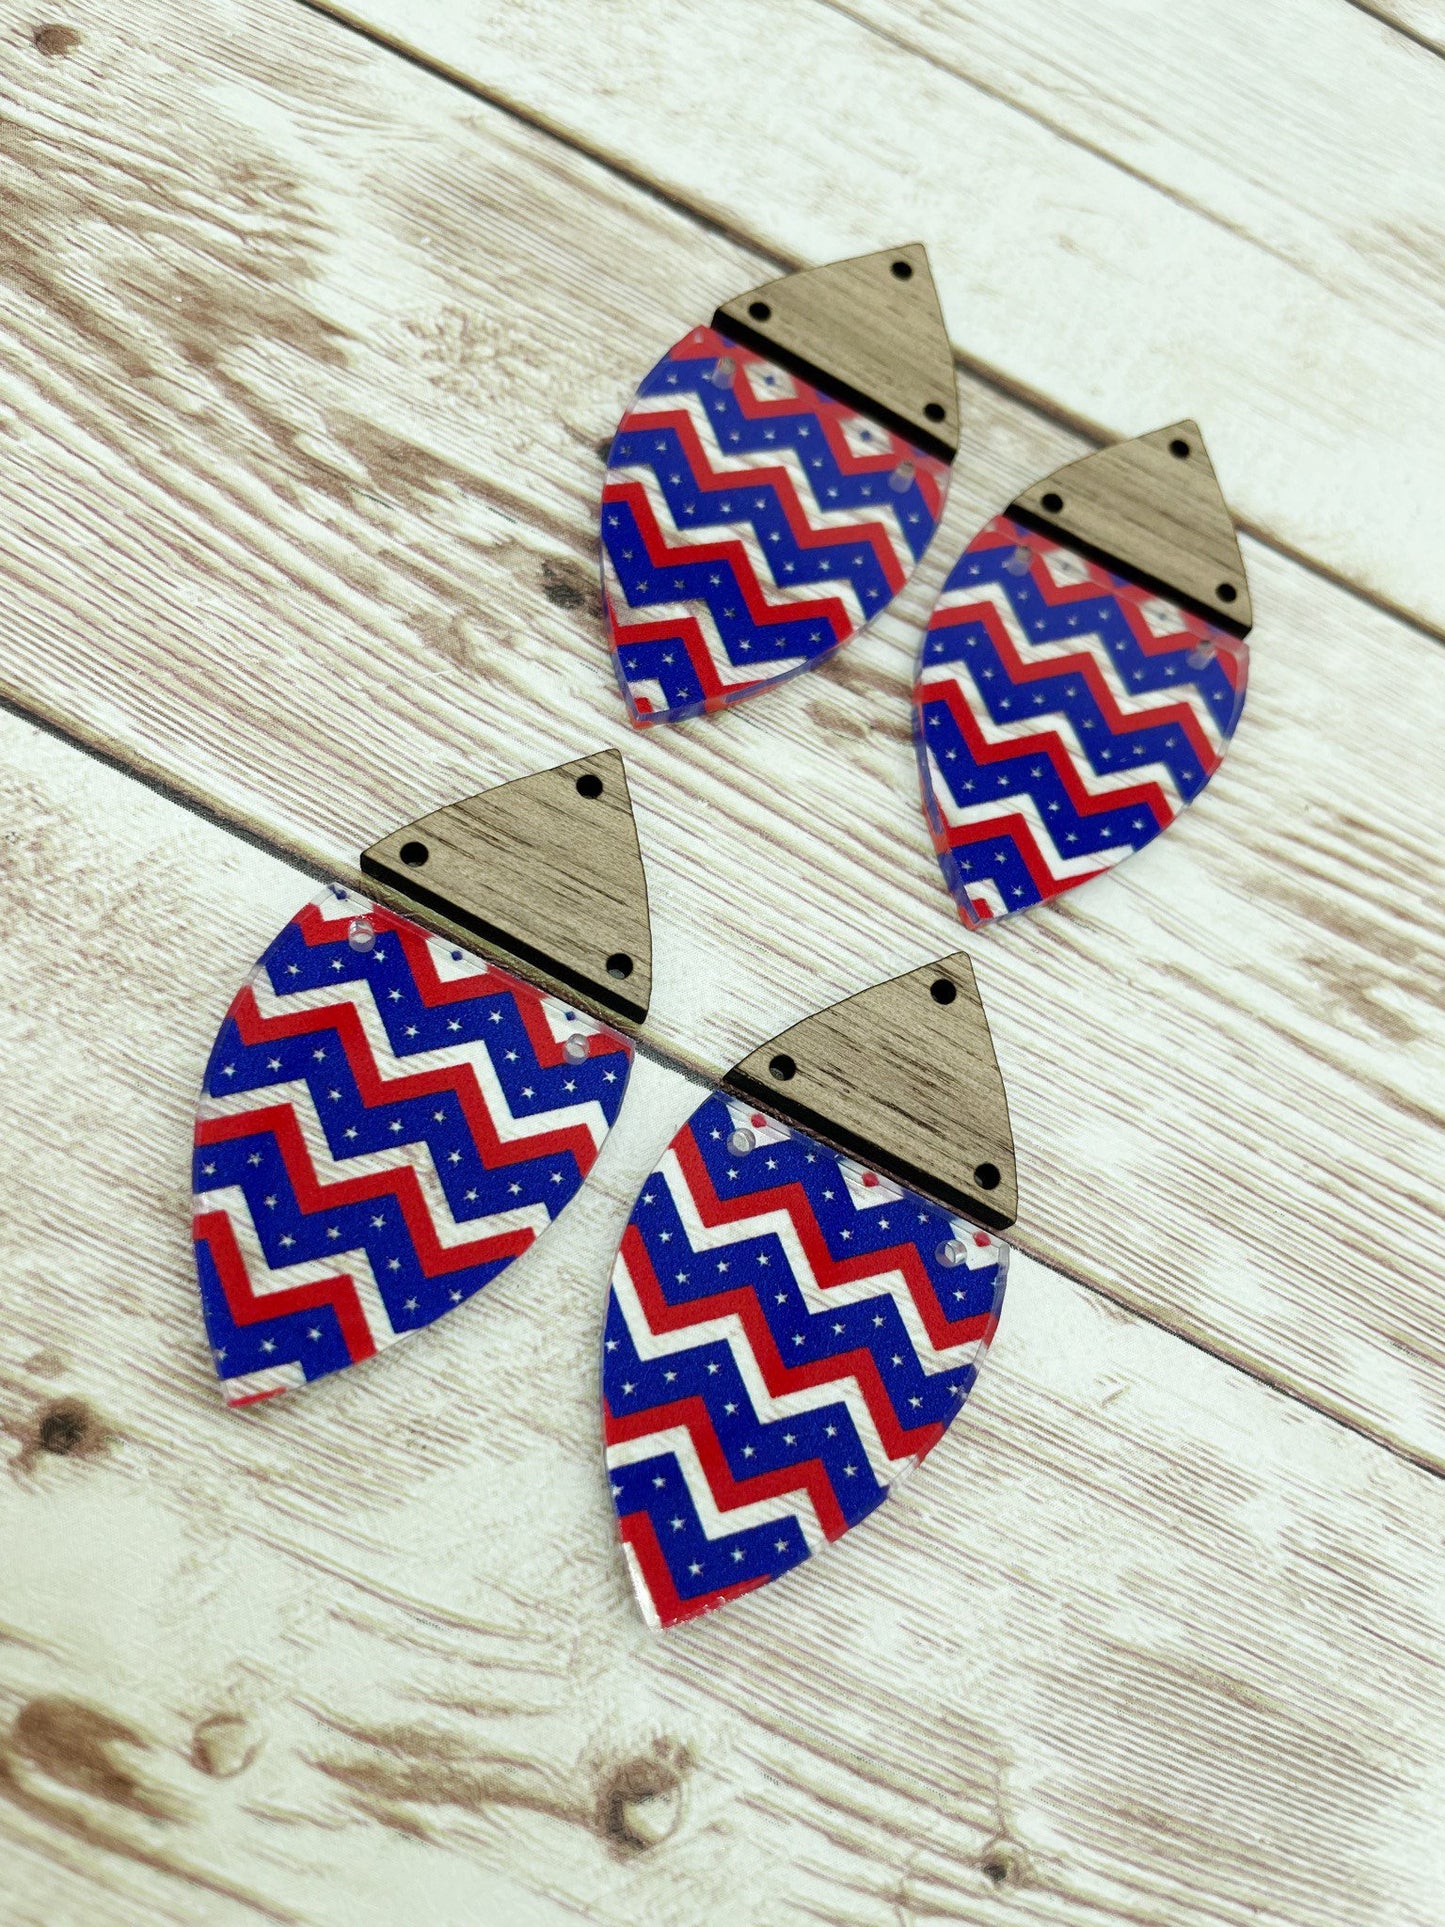 Patterned Acrylic and Wood Red White Blue Star Earring Blanks, DIY Jewelry Making